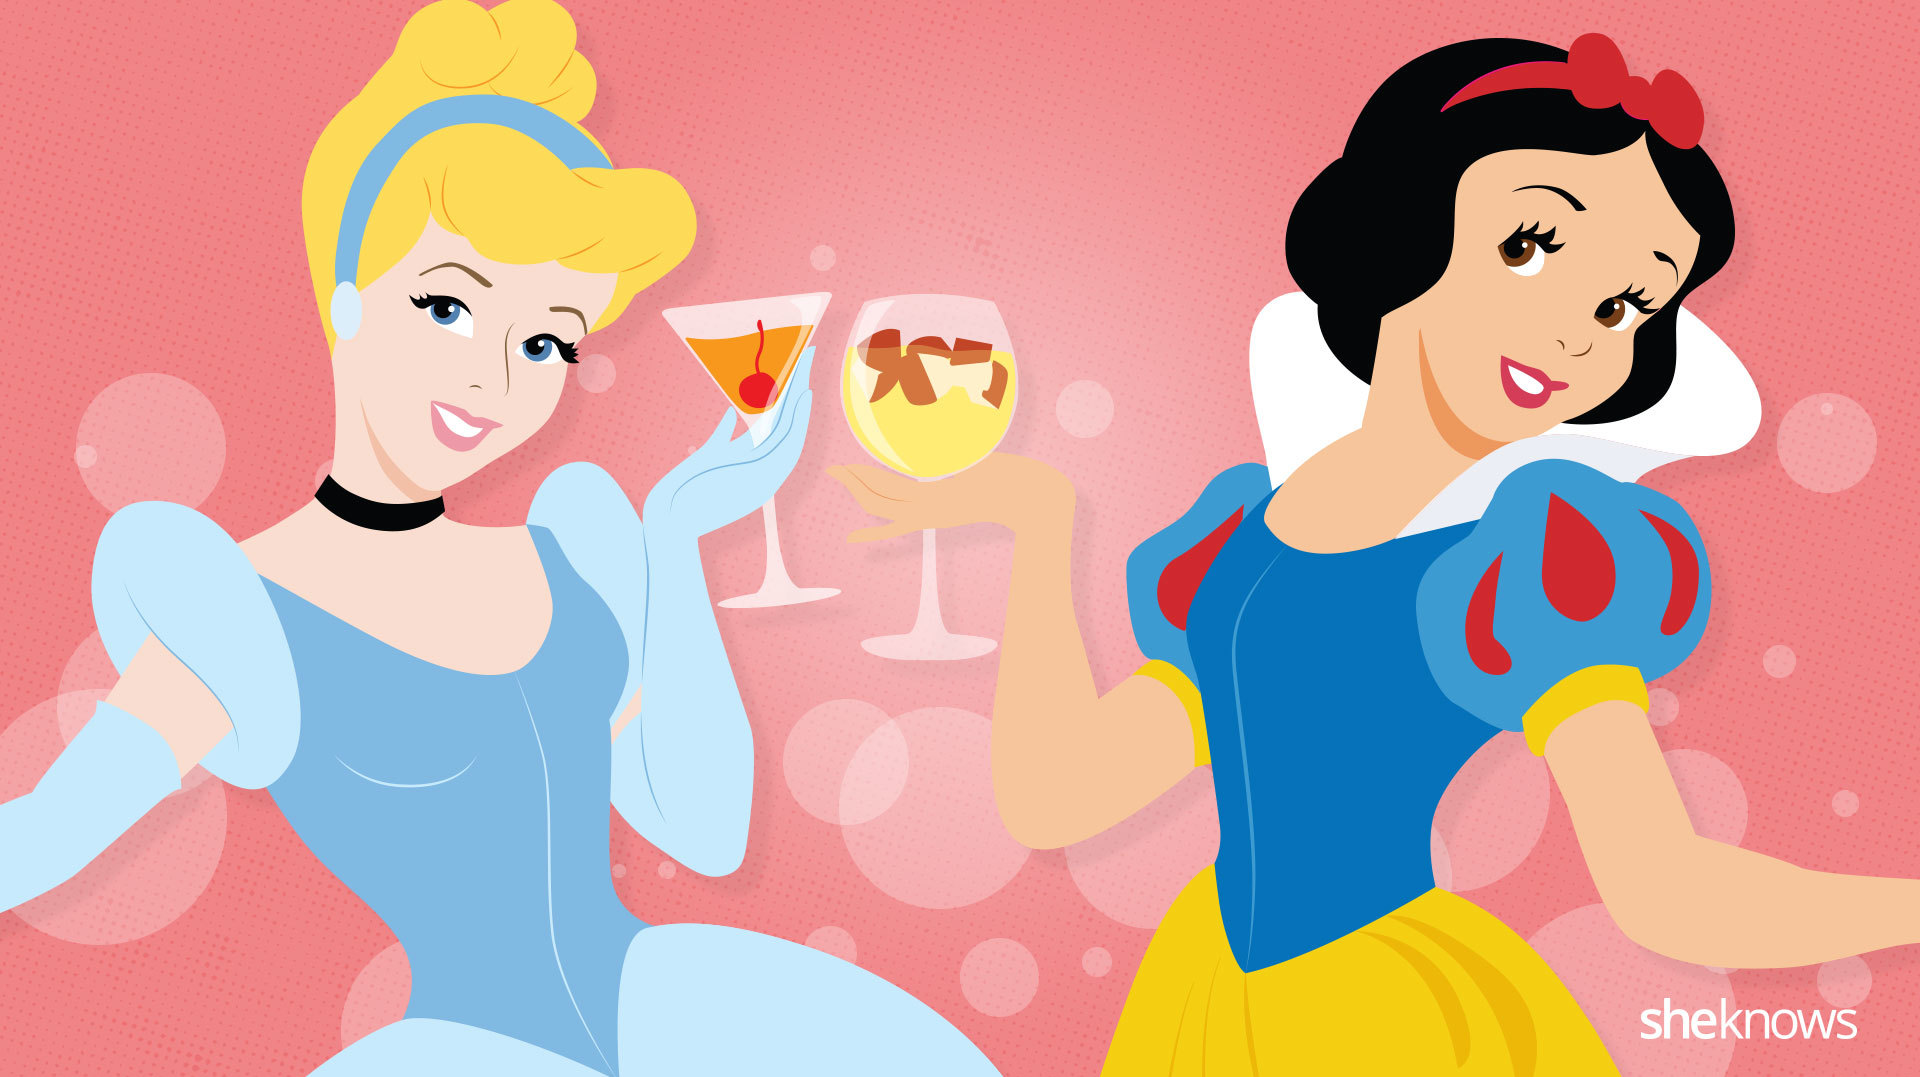 If Disney princesses could drink, these would be their go-to cocktails